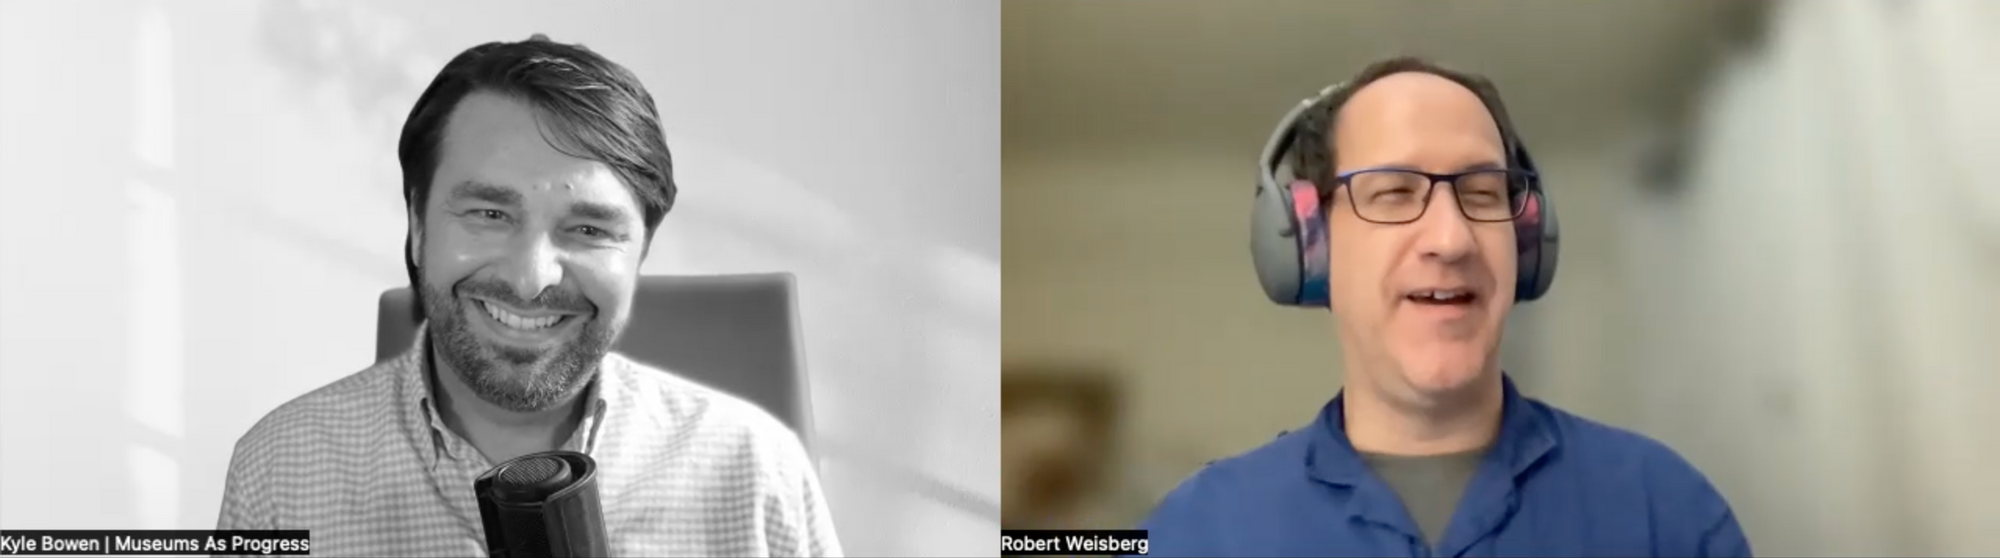 two men speaking in a video call; the image on the left is in black-and-white